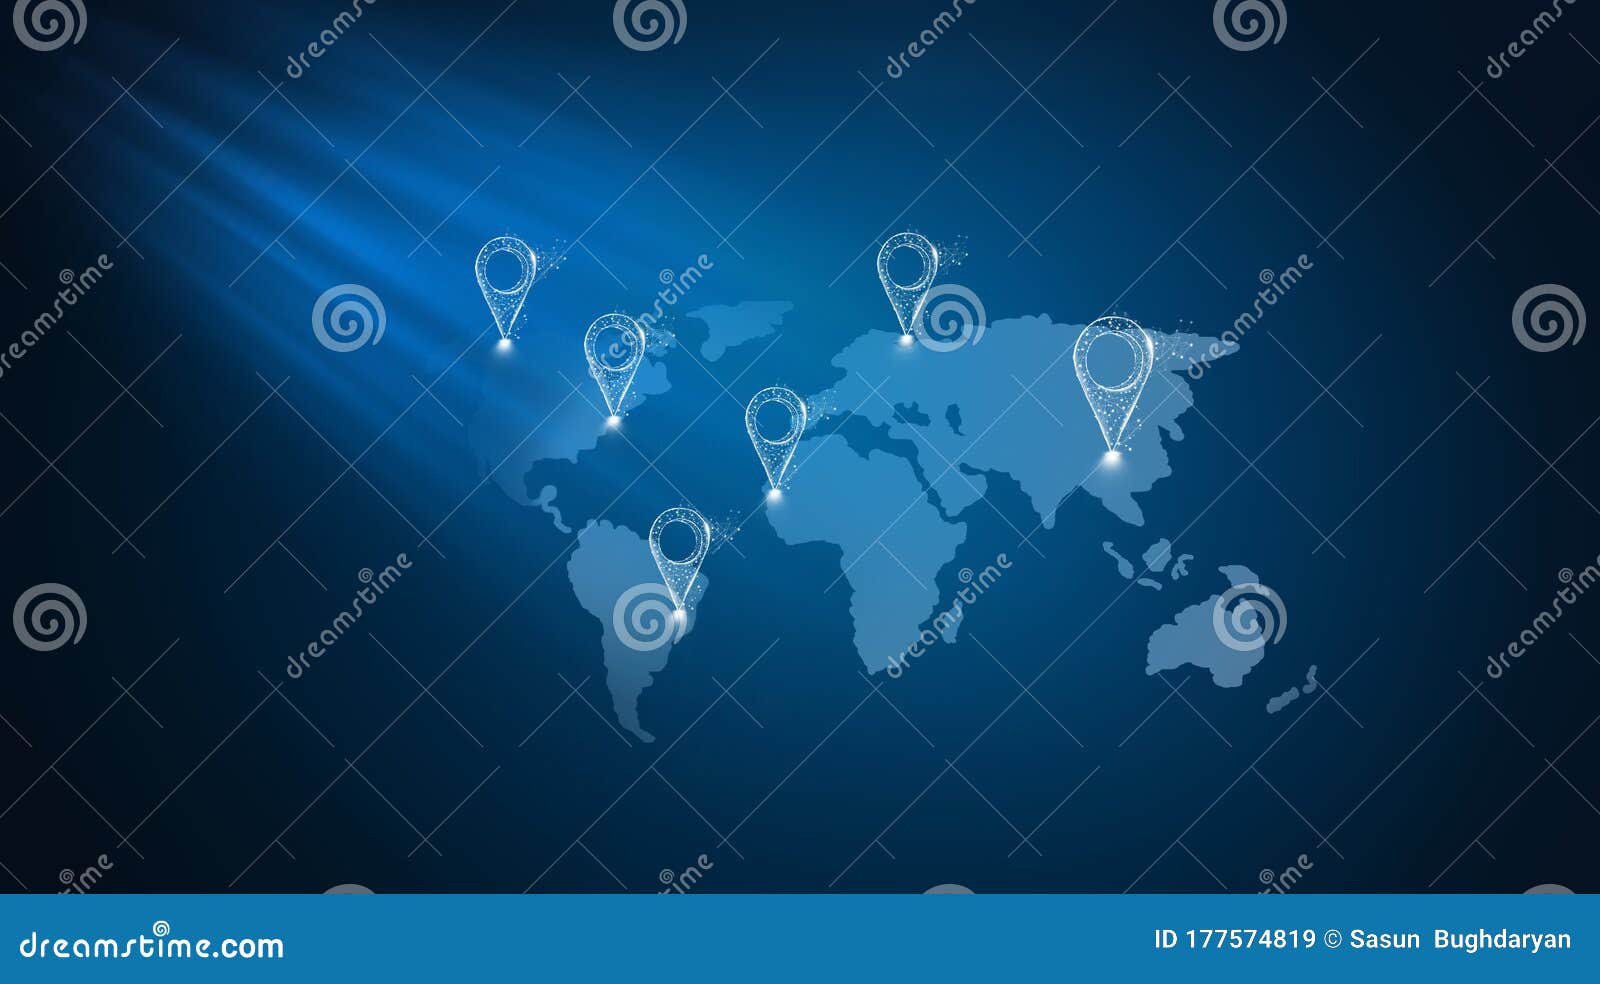 Search for Locations Around the World. Location Map Concept Stock Image